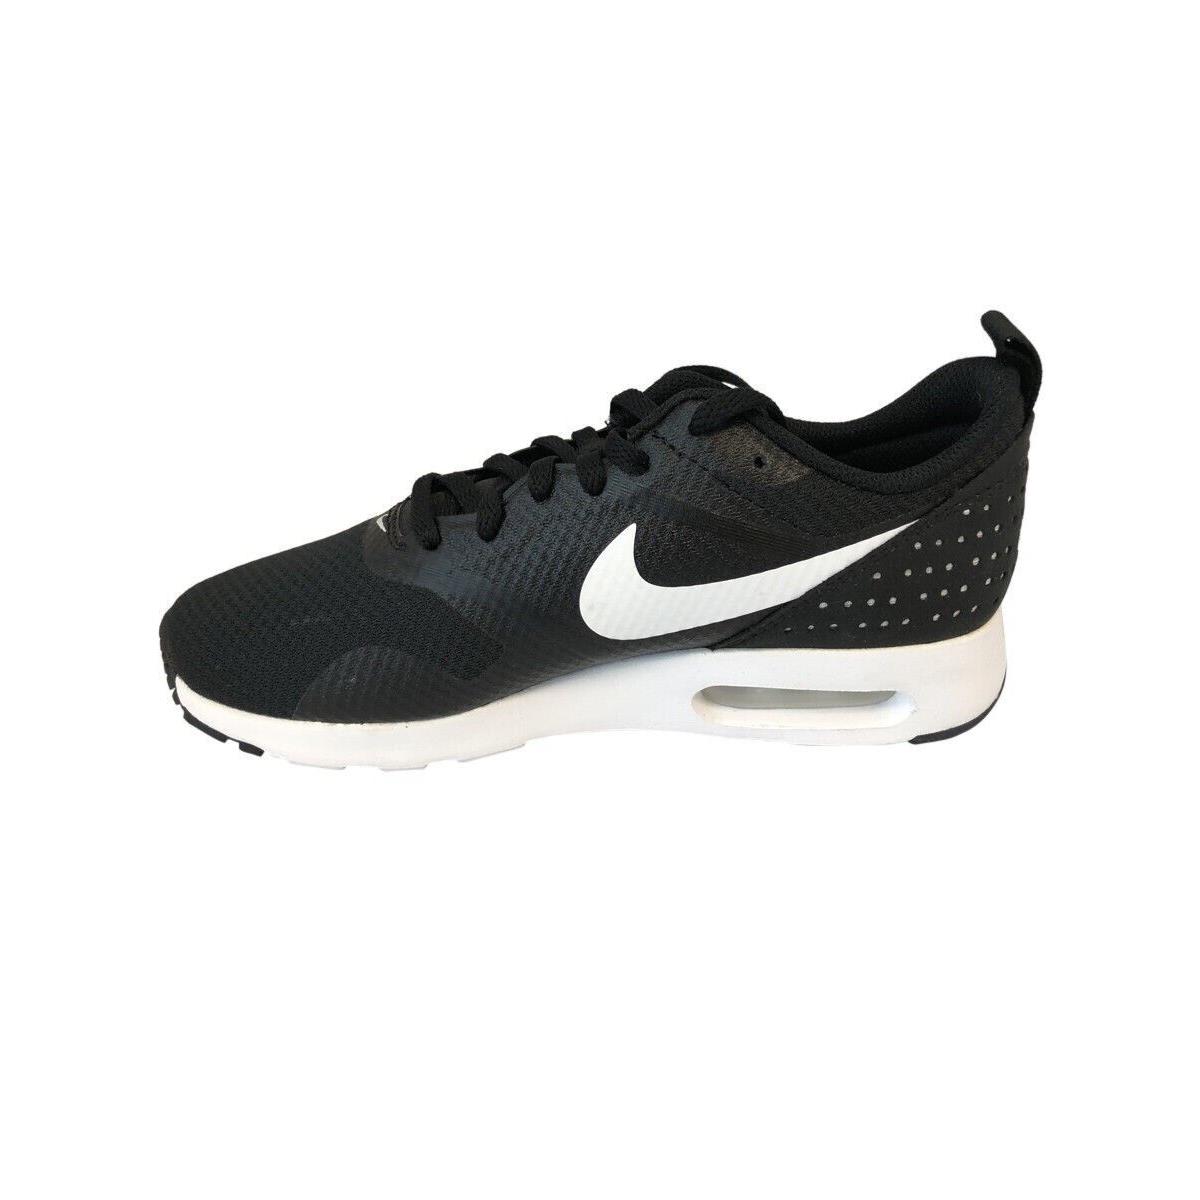 Nike Womens Air Max Tavas 916791-001 Black Running Shoes Sneakers Size 11